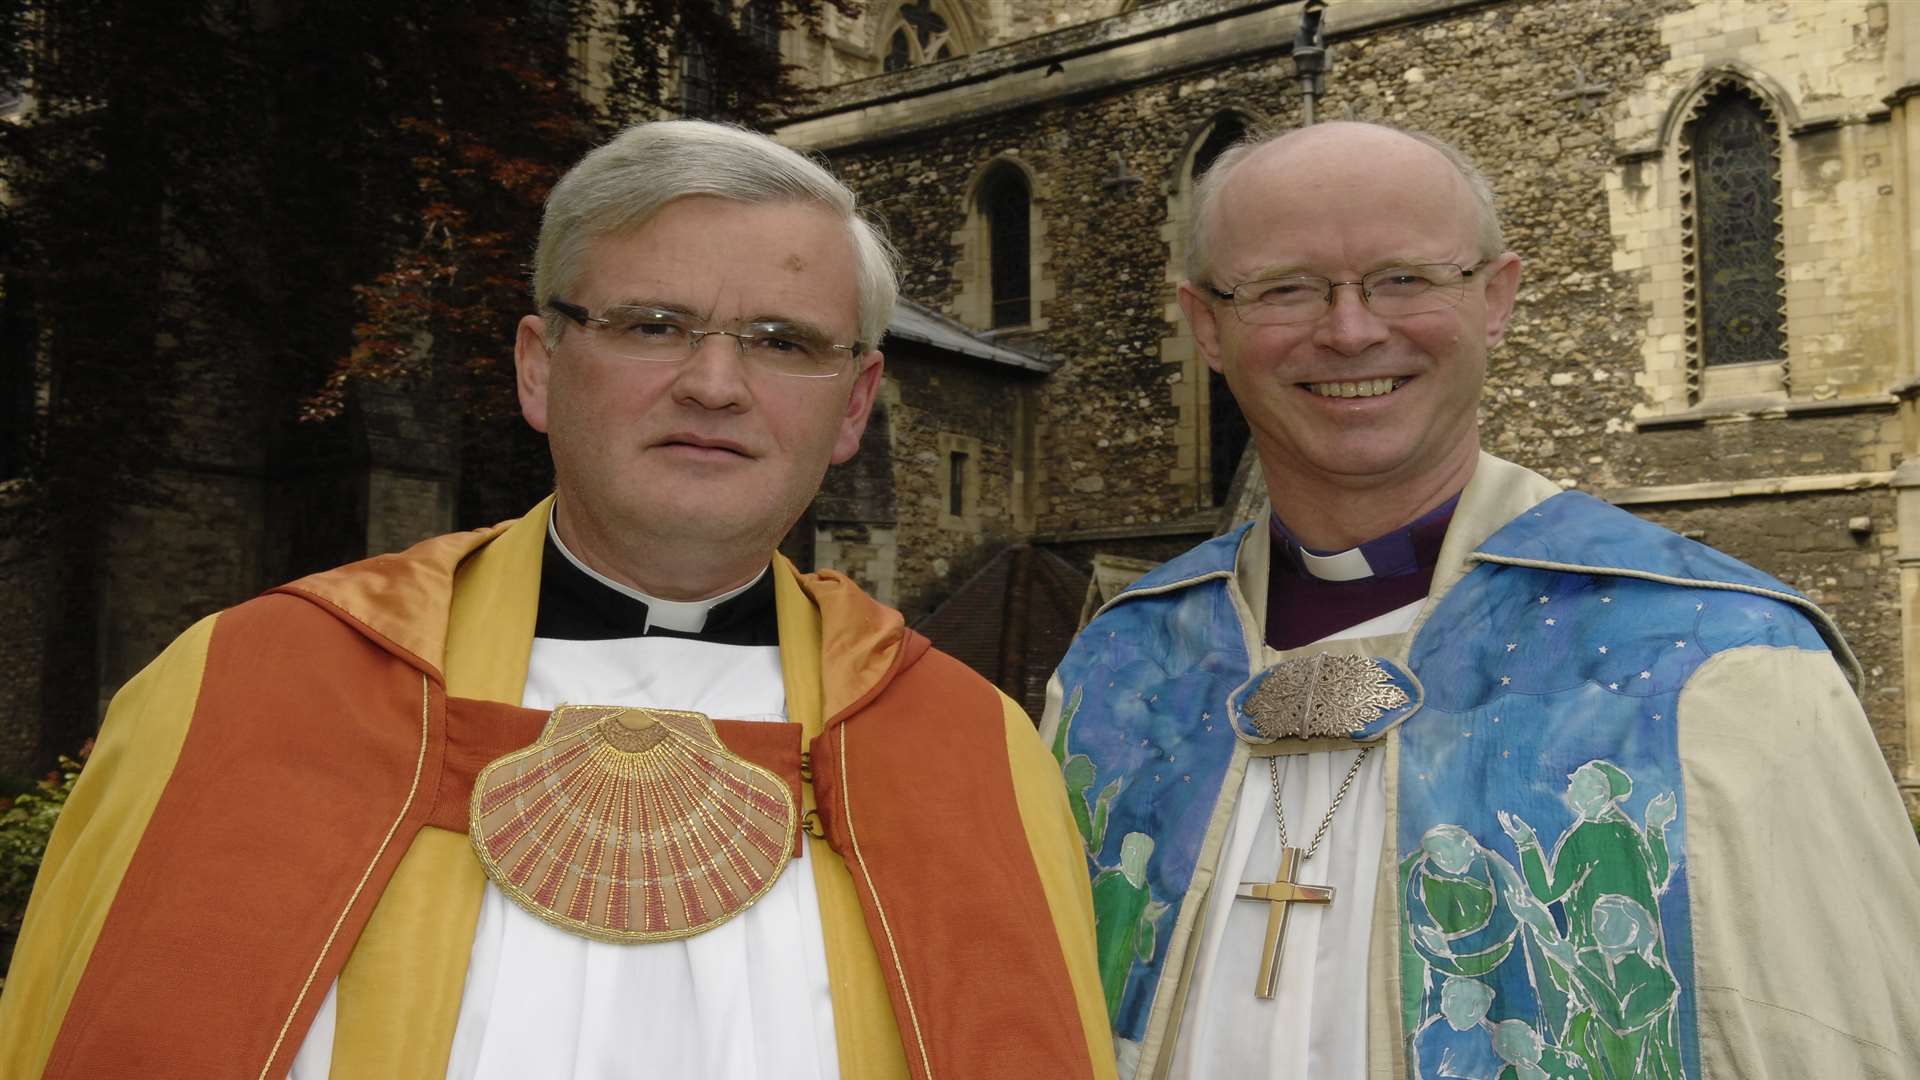 The former Dean, Dr Mark Beach, with Rt Revd James Langstaff, Bishop of Rochester, at his installation as Dean in 2012